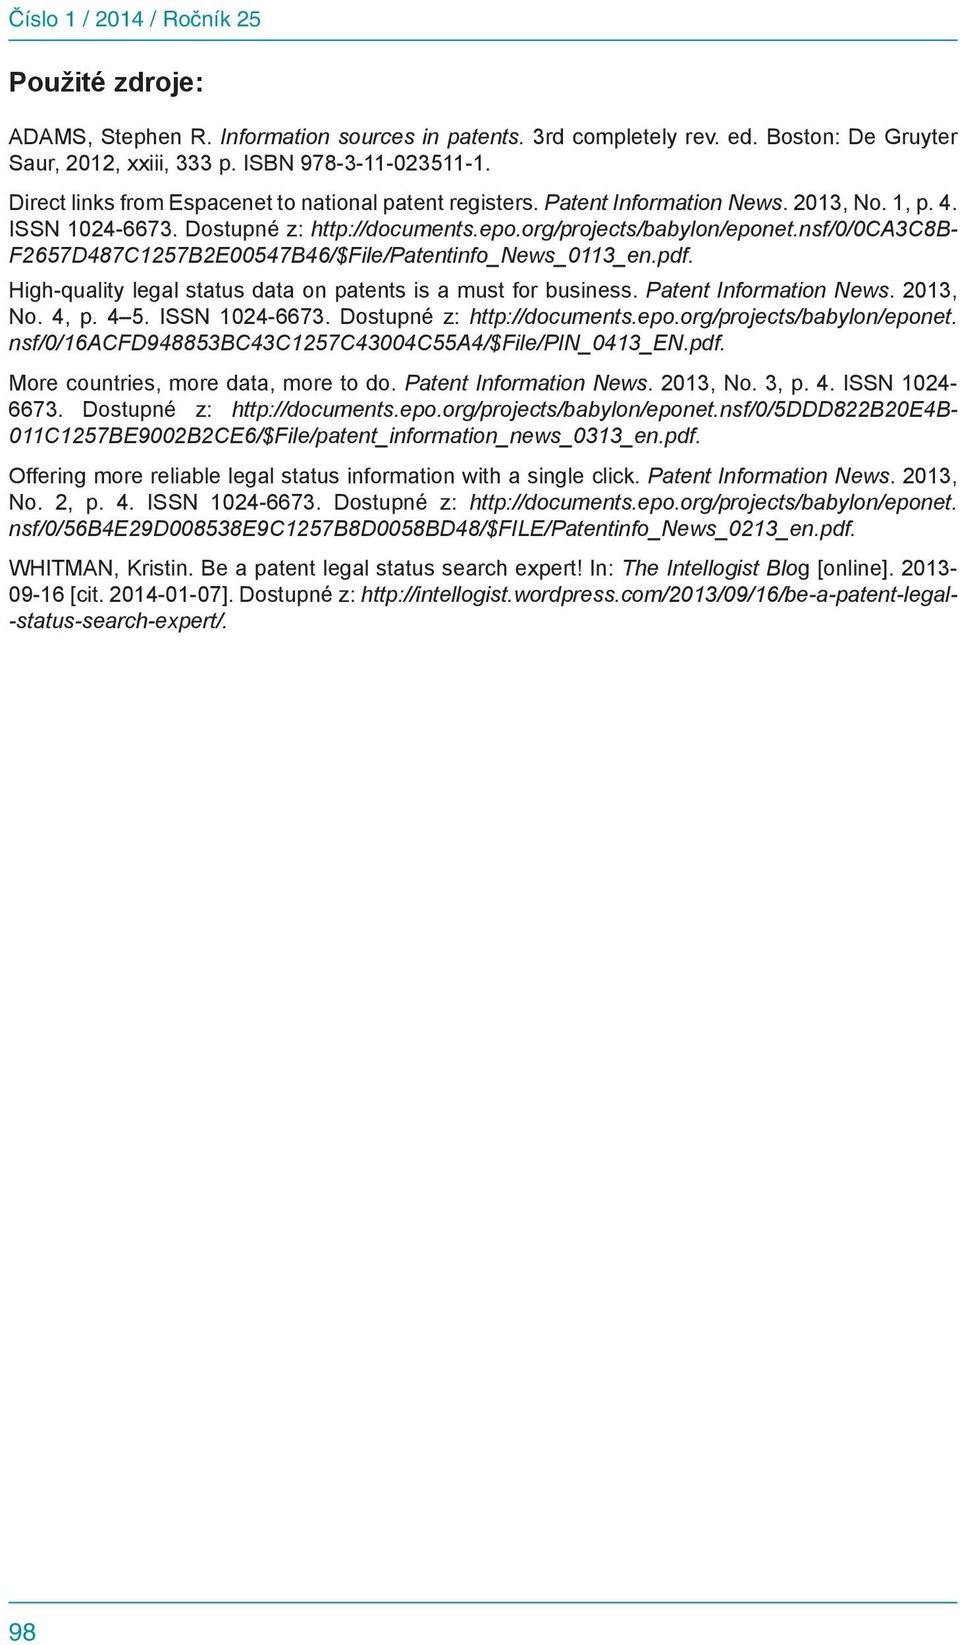 nsf/0/0ca3c8b- F2657D487C1257B2E00547B46/$File/Patentinfo_News_0113_en.pdf. High-quality legal status data on patents is a must for business. Patent Information News. 2013, No. 4, p. 4 5.